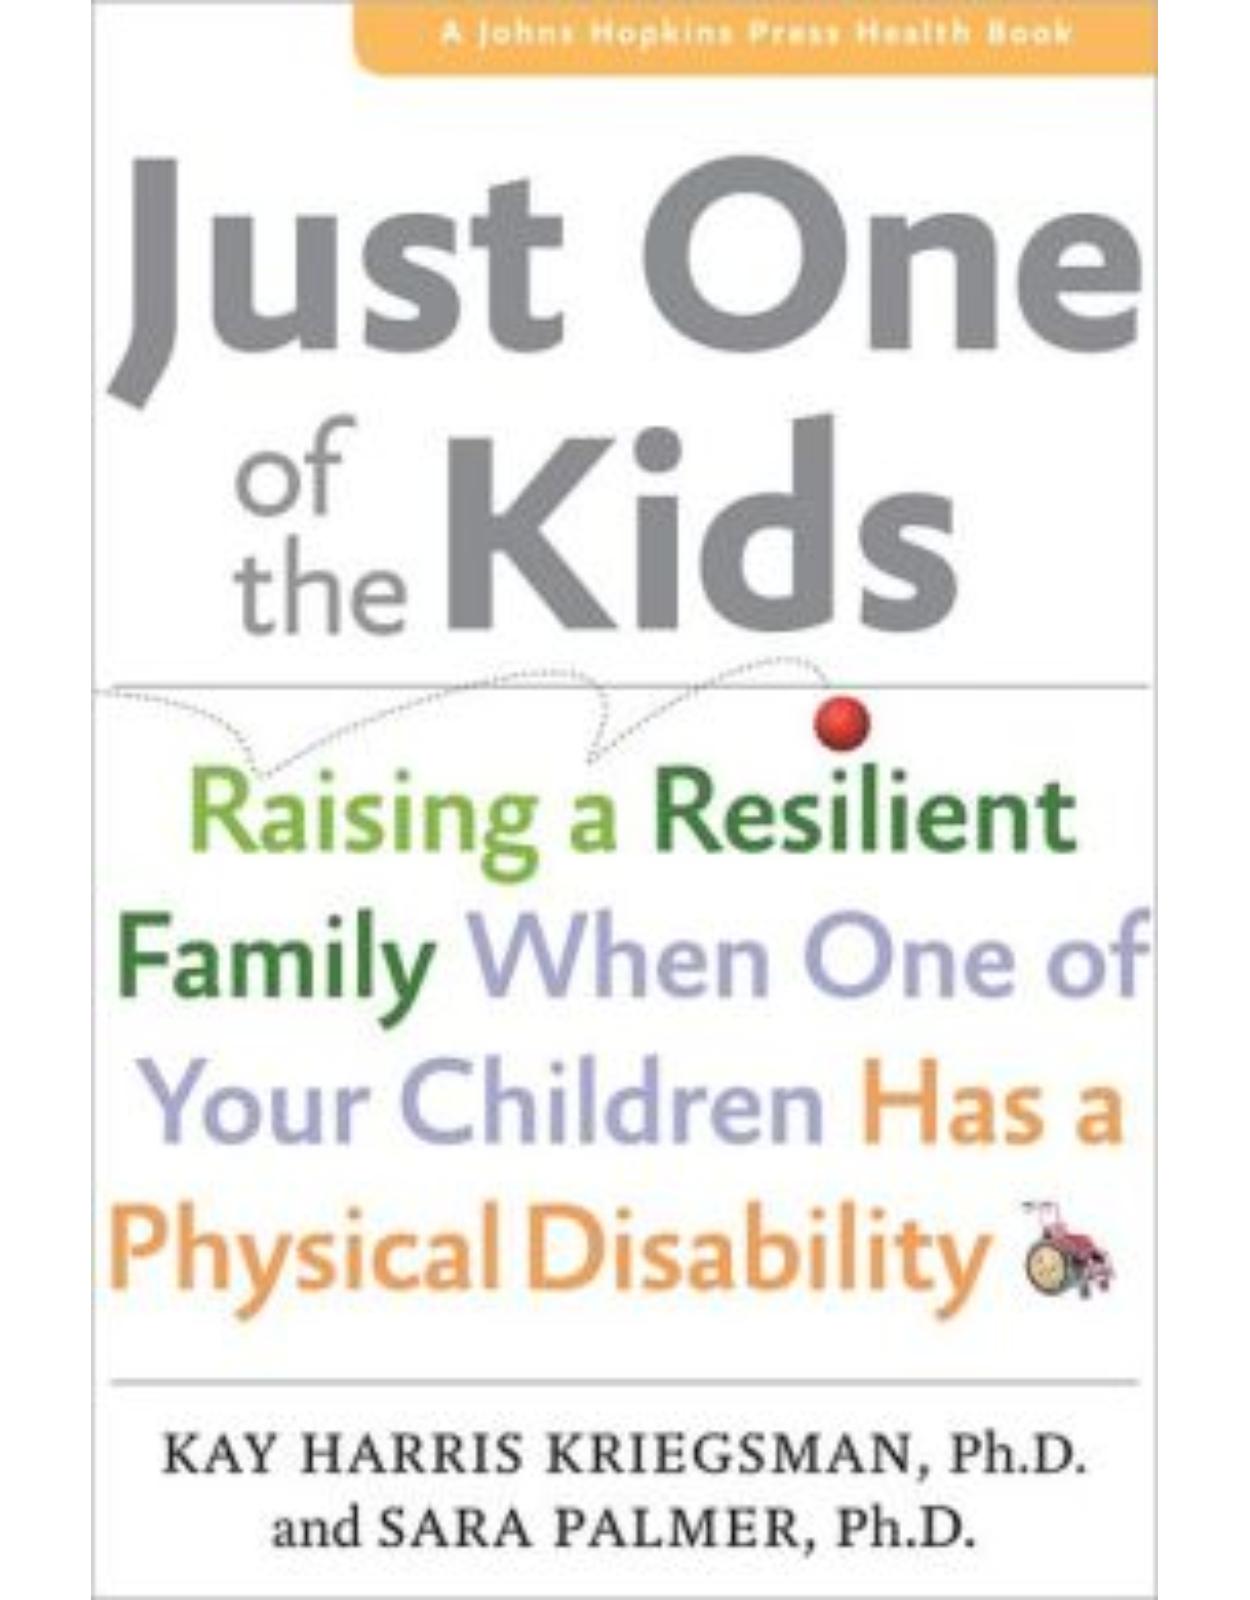 Just One of the Kids. Raising a Resilient Family When One of Your Children Has a Physical Disability